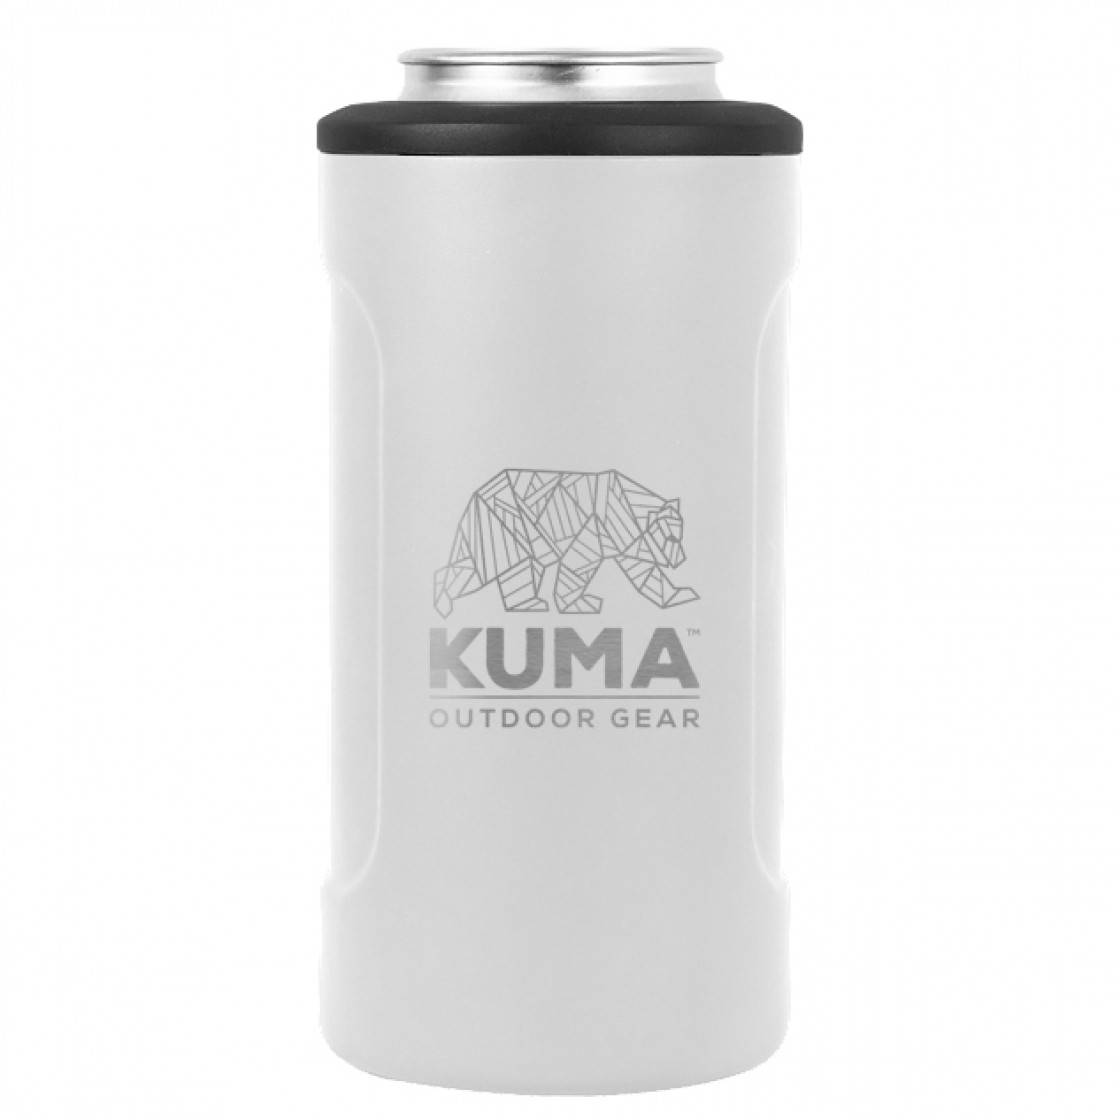 Outdoor Gear | 3-in-1 KUMA™ Coozie